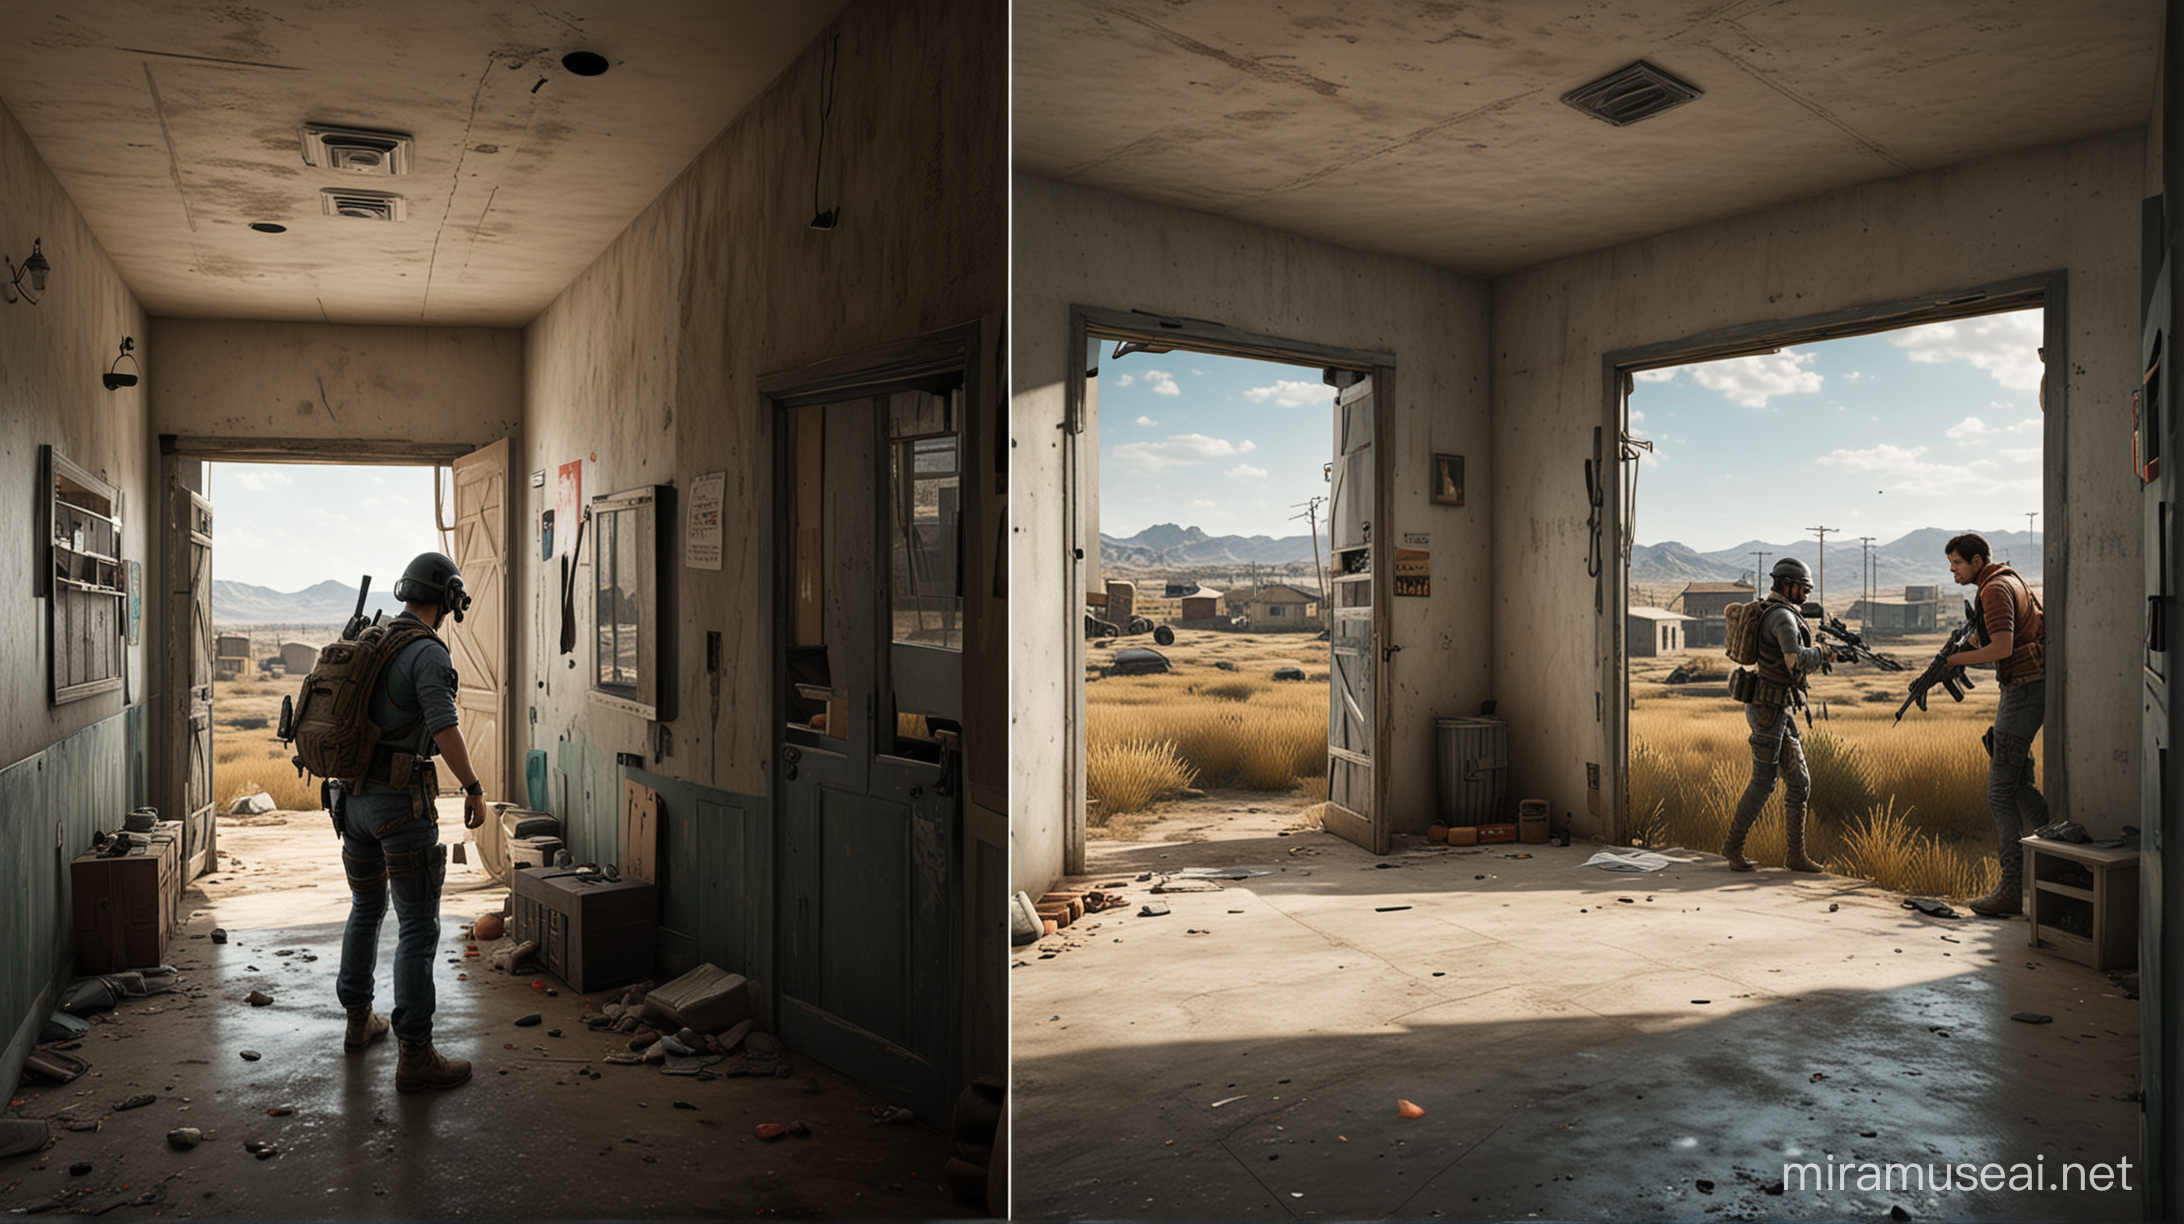 There are two spaces in the picture, one is a normal home space with natural lights and the other is a PUBG game space with colors related to the game environment. Between these two spaces there is a mobile phone and a man tries to go from the home space to the game space and become one of the characters of the game